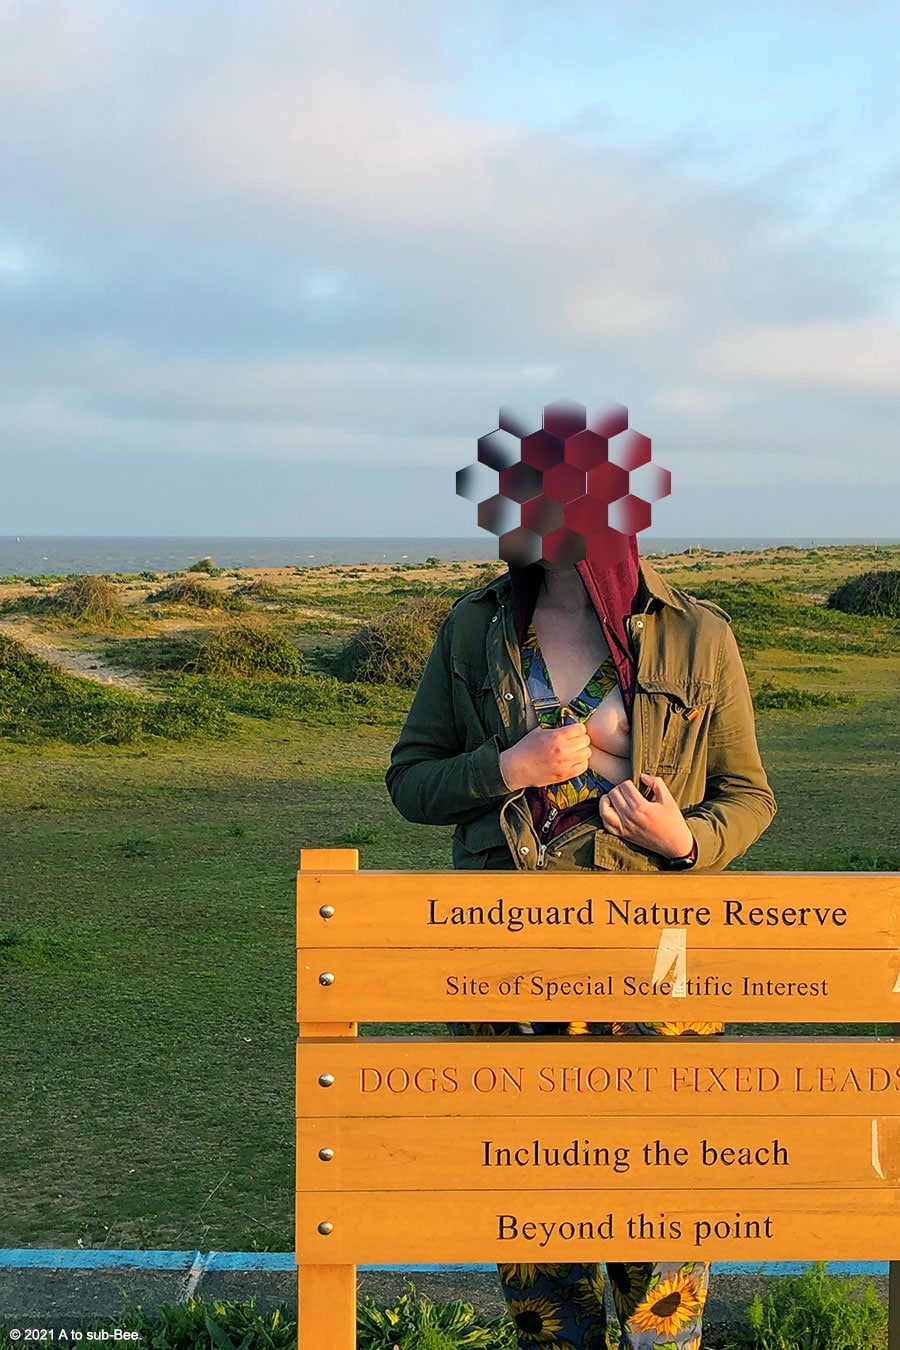 Bee flashing theor tits next to a nature reserve sign